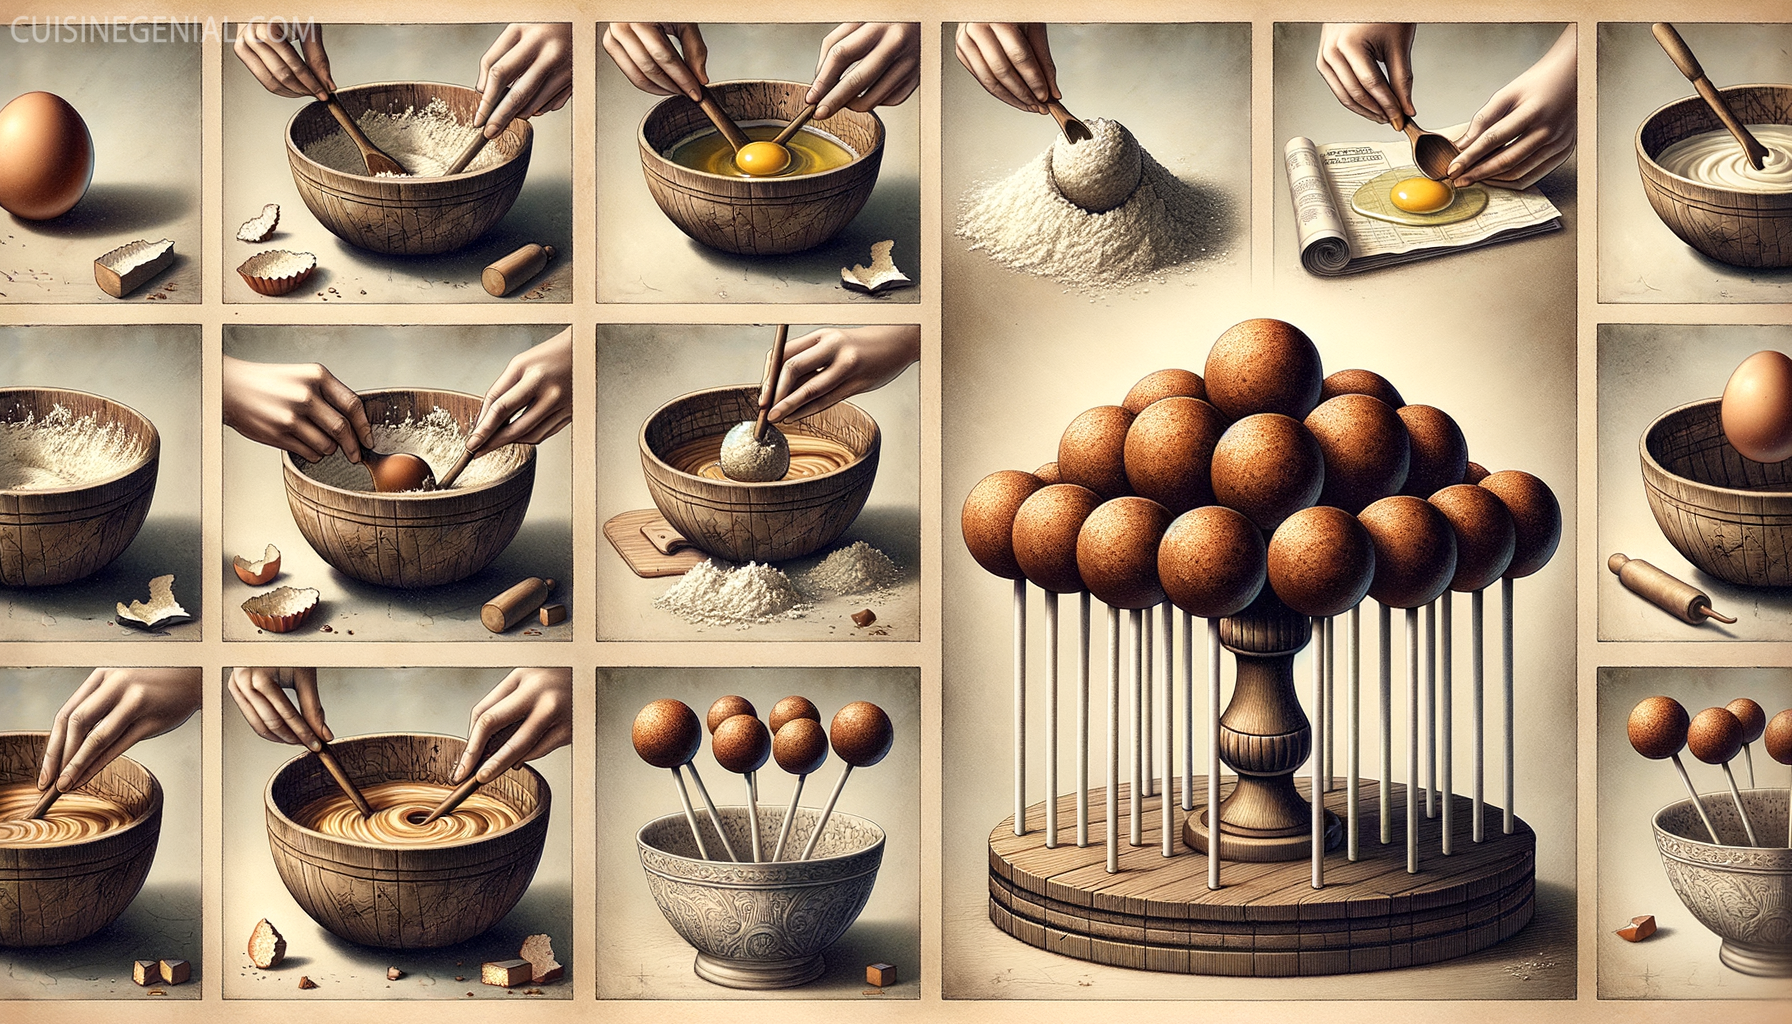 Step-by-step process of making cake pops without frosting, from mixing ingredients to displaying finished cake pops.